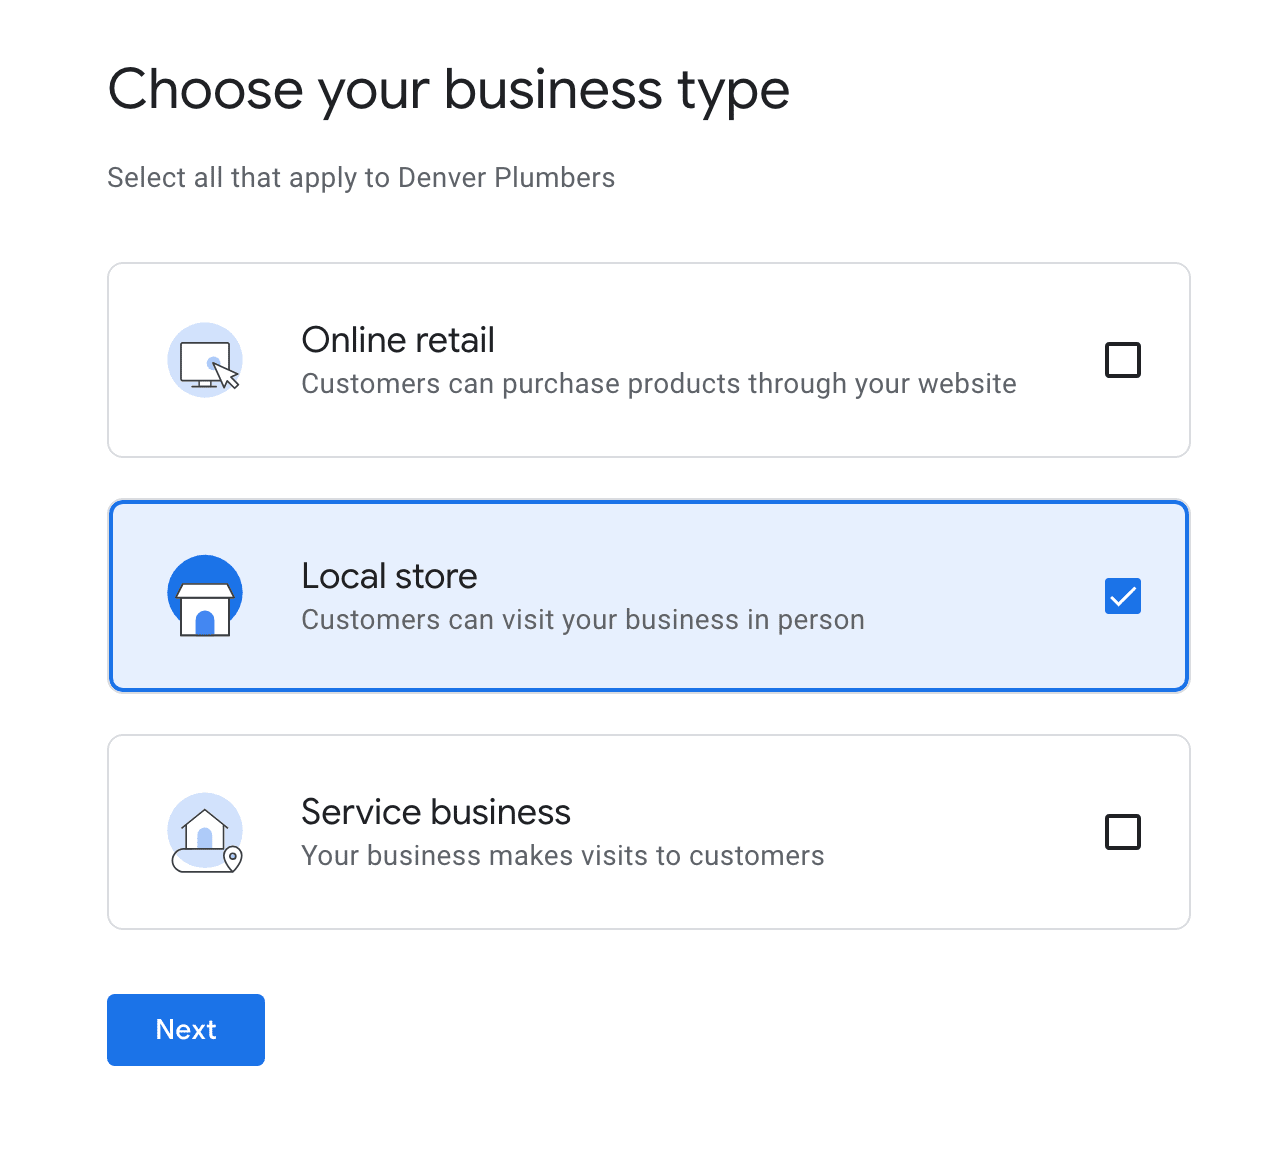 "Local store" selected under "Choose your business type" window in GBP settings